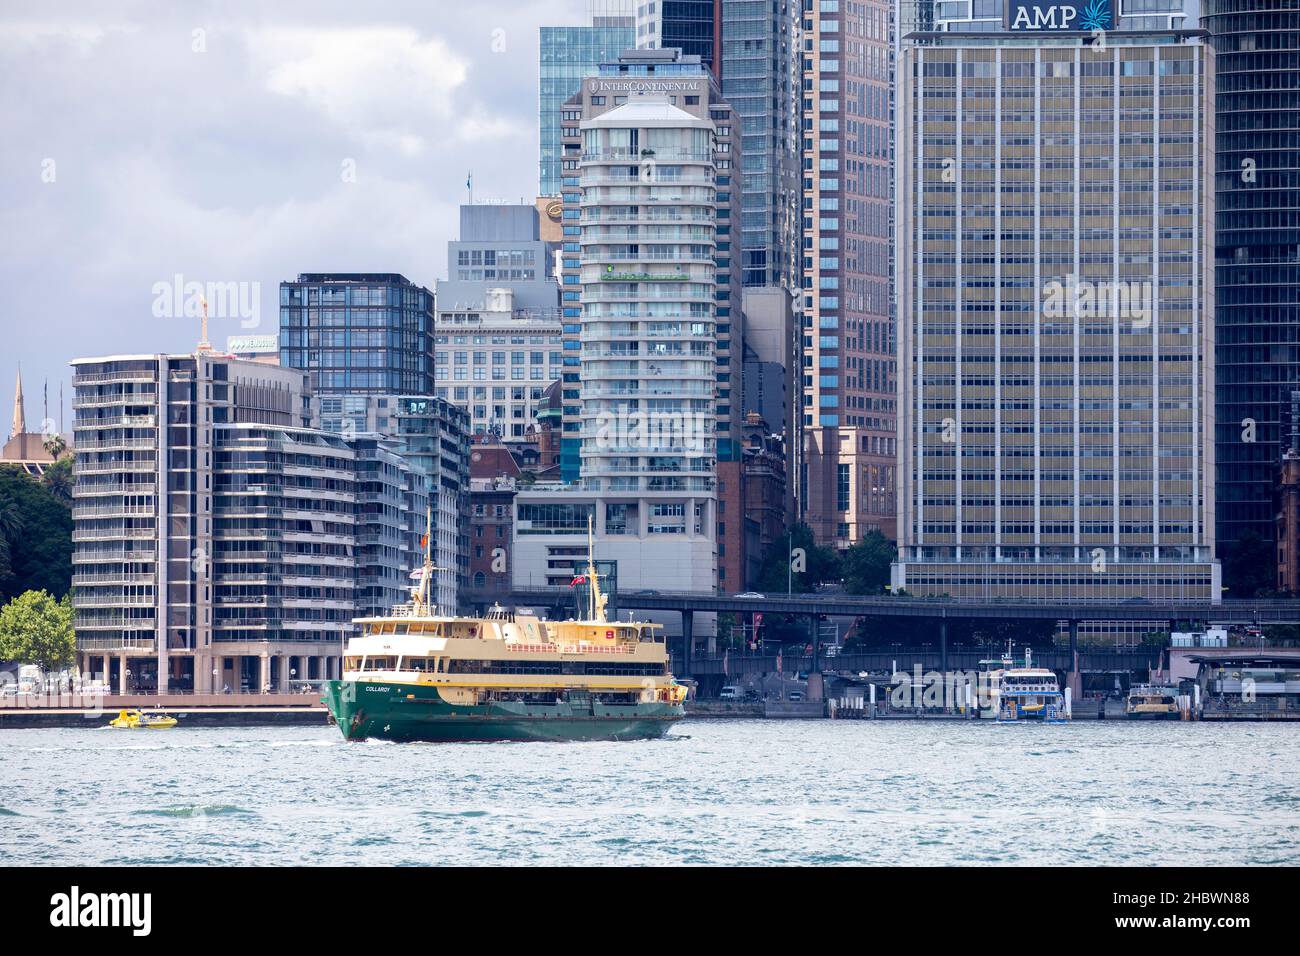 Manly ferry, Iconic Sydney ferry, the MV Collaroy ferry, a freshwater class ferry approaches Circular Quay ferry terminal in Sydney,Australia Stock Photo